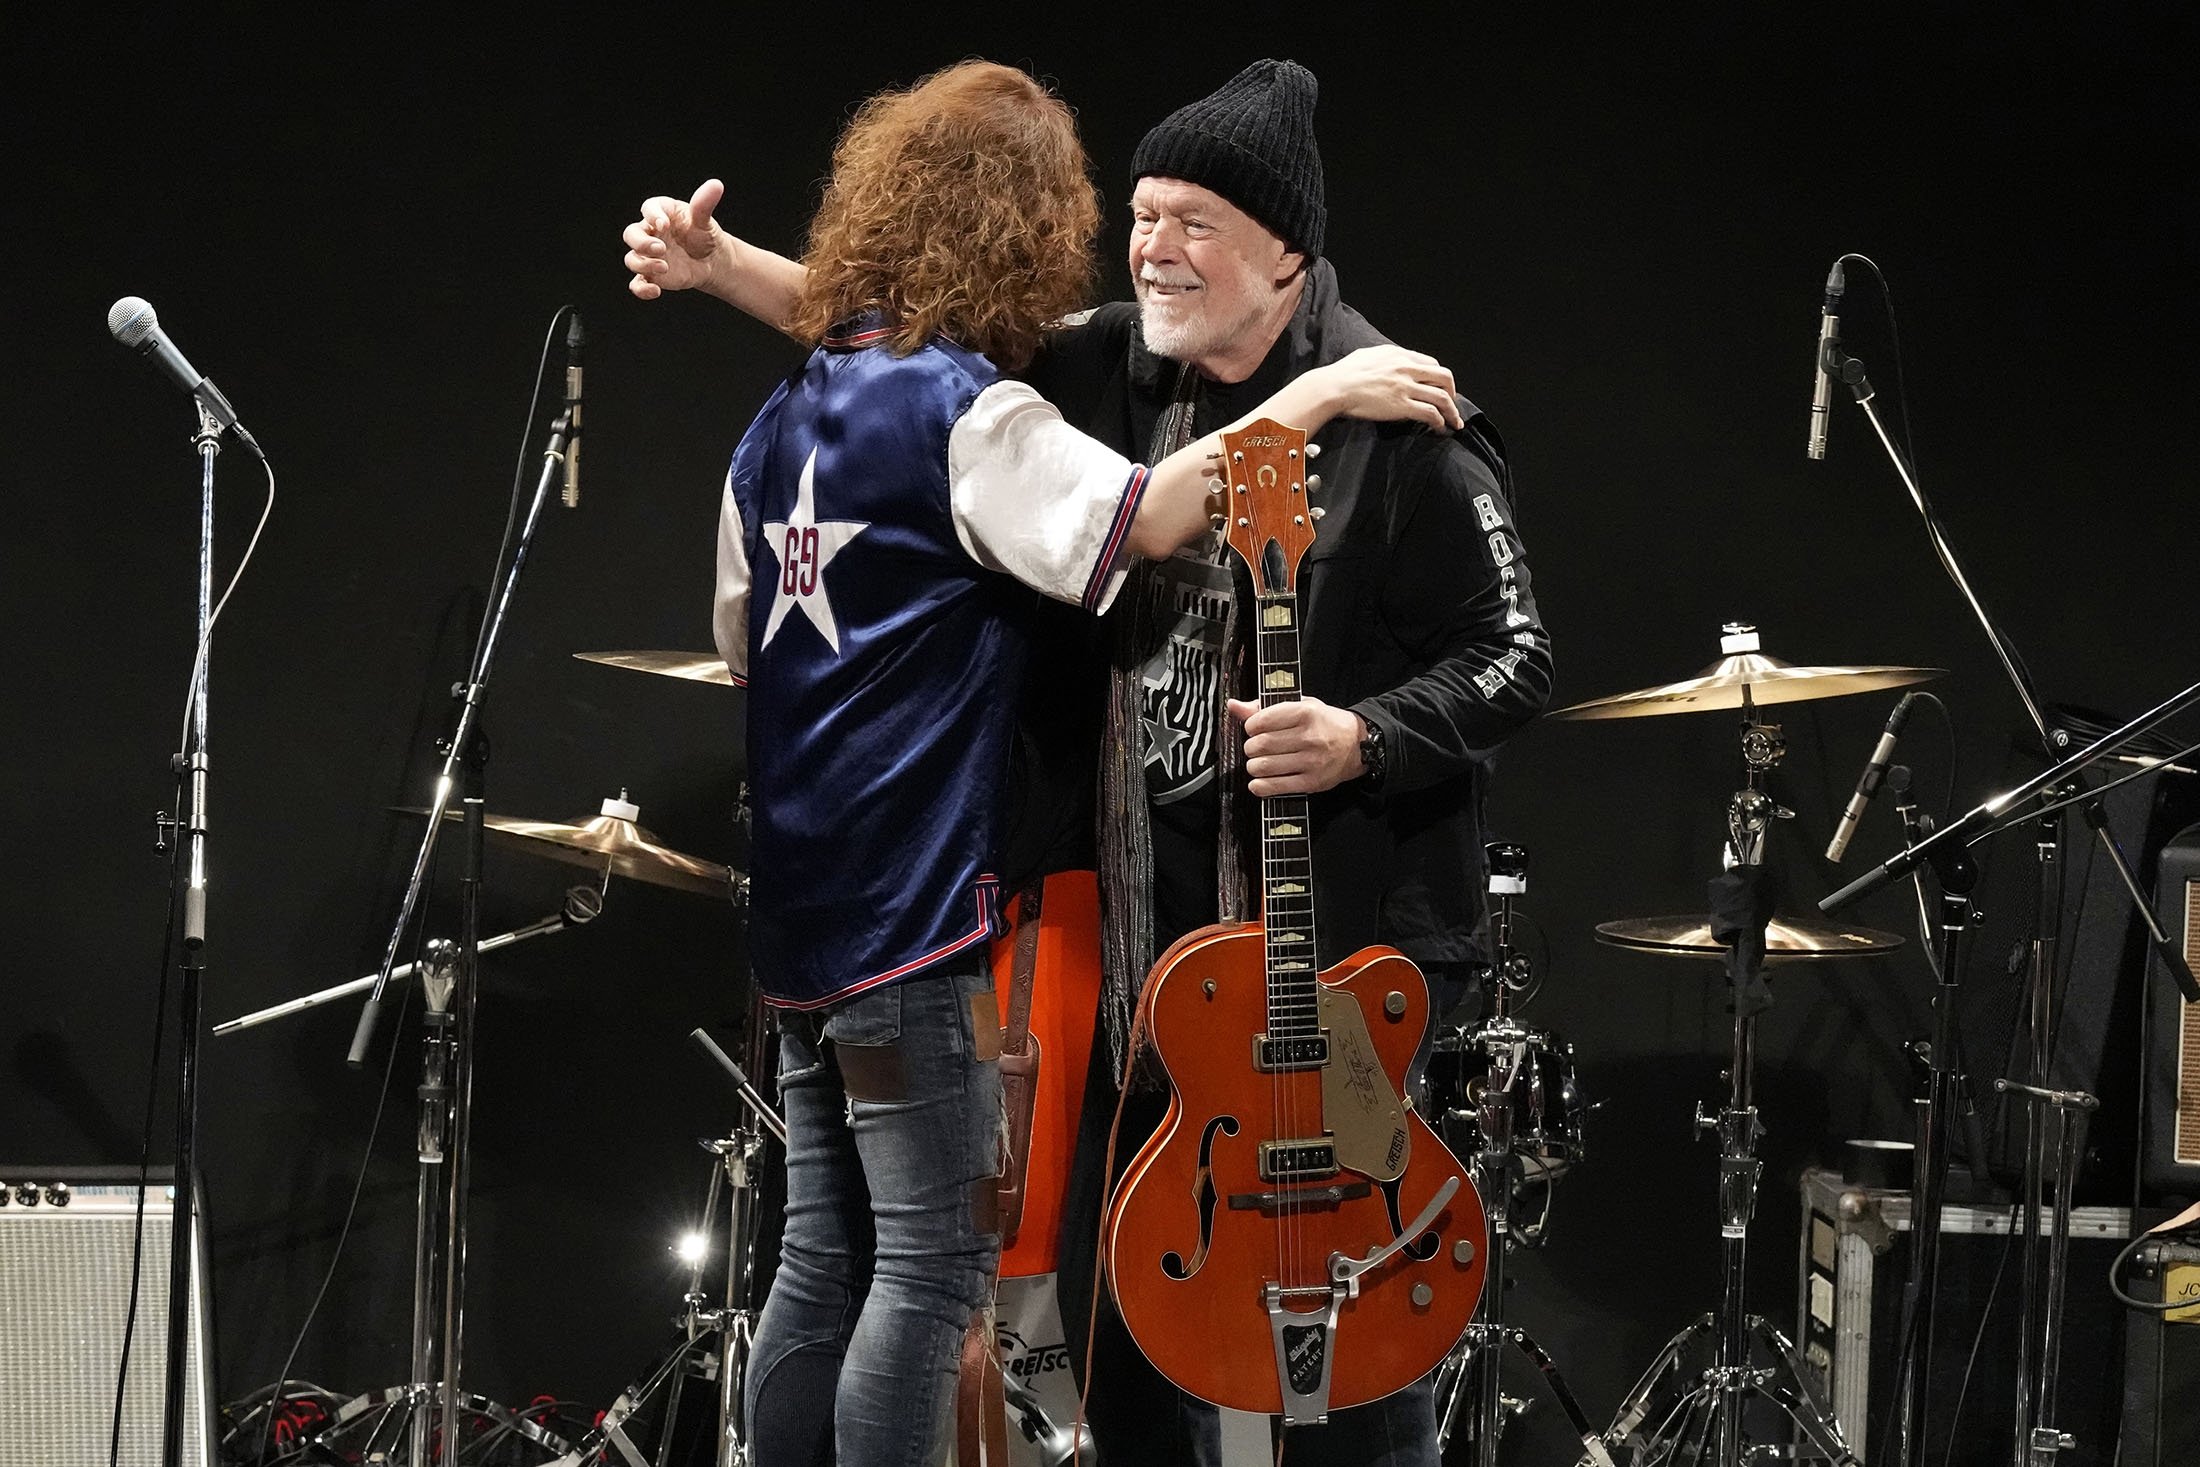 Canadian rock legend Randy Bachman, right, and Japanese musician TAKESHI embrace each other after Bachman reunites with his stolen Gretsch guitar during the Lost and Found Guitar Exchange Ceremony, at Canadian Embassy in Tokyo, Japan, July 1, 2022. (AP Photo)